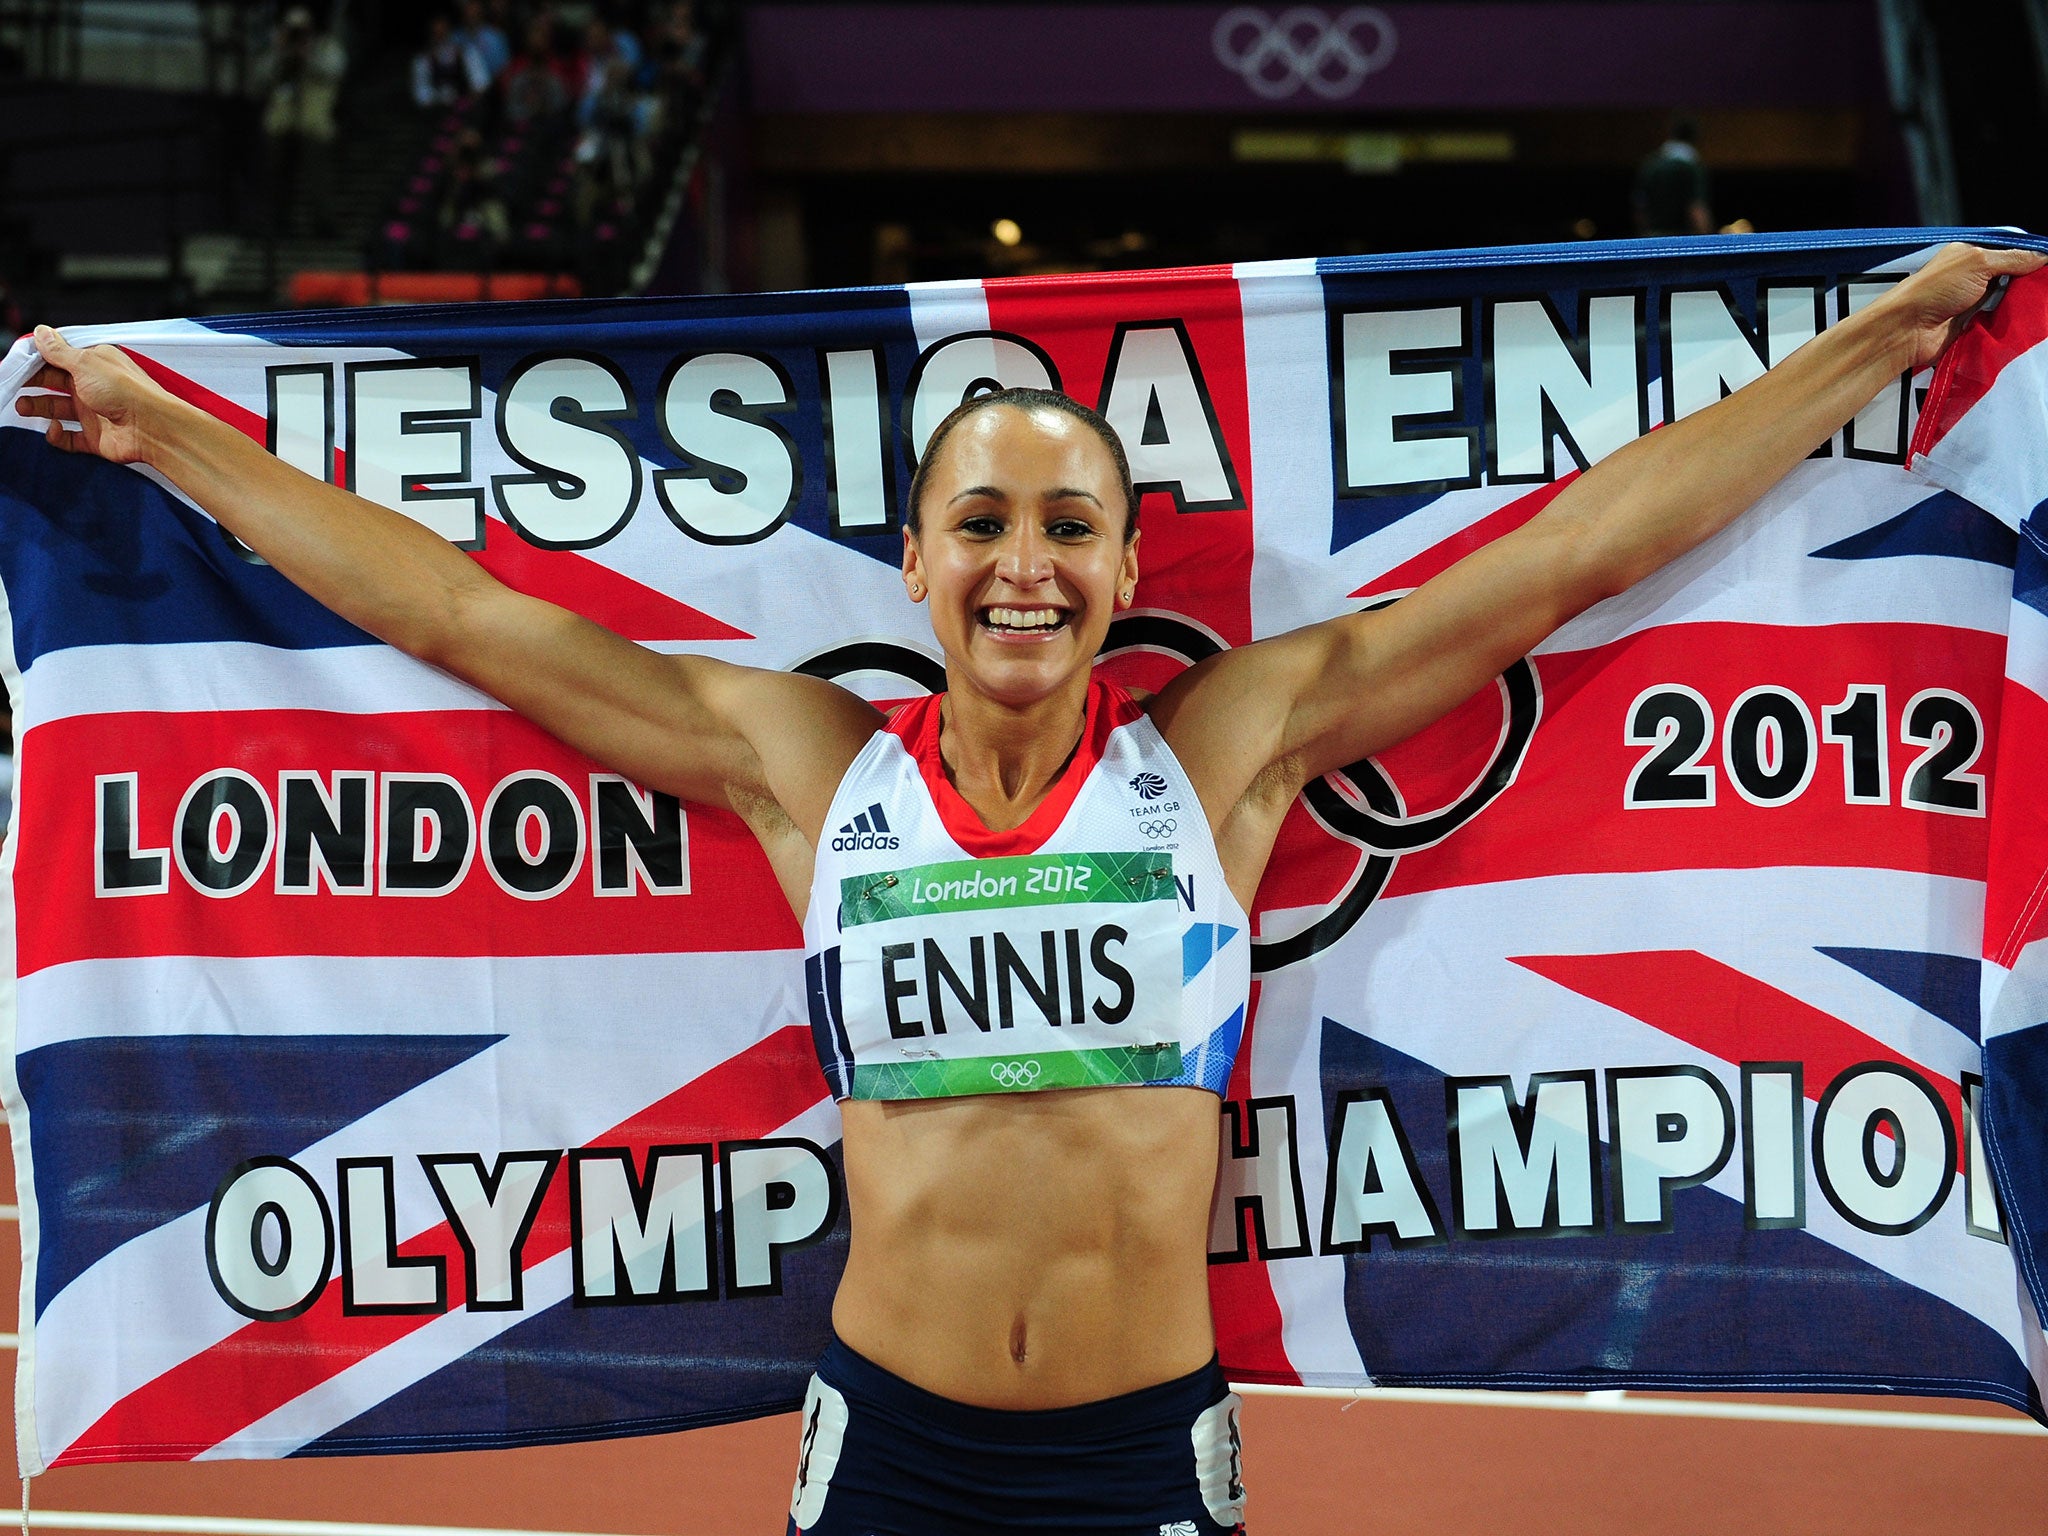 Jessica Ennis-Hill was part of 'Super Saturday' at London 2012